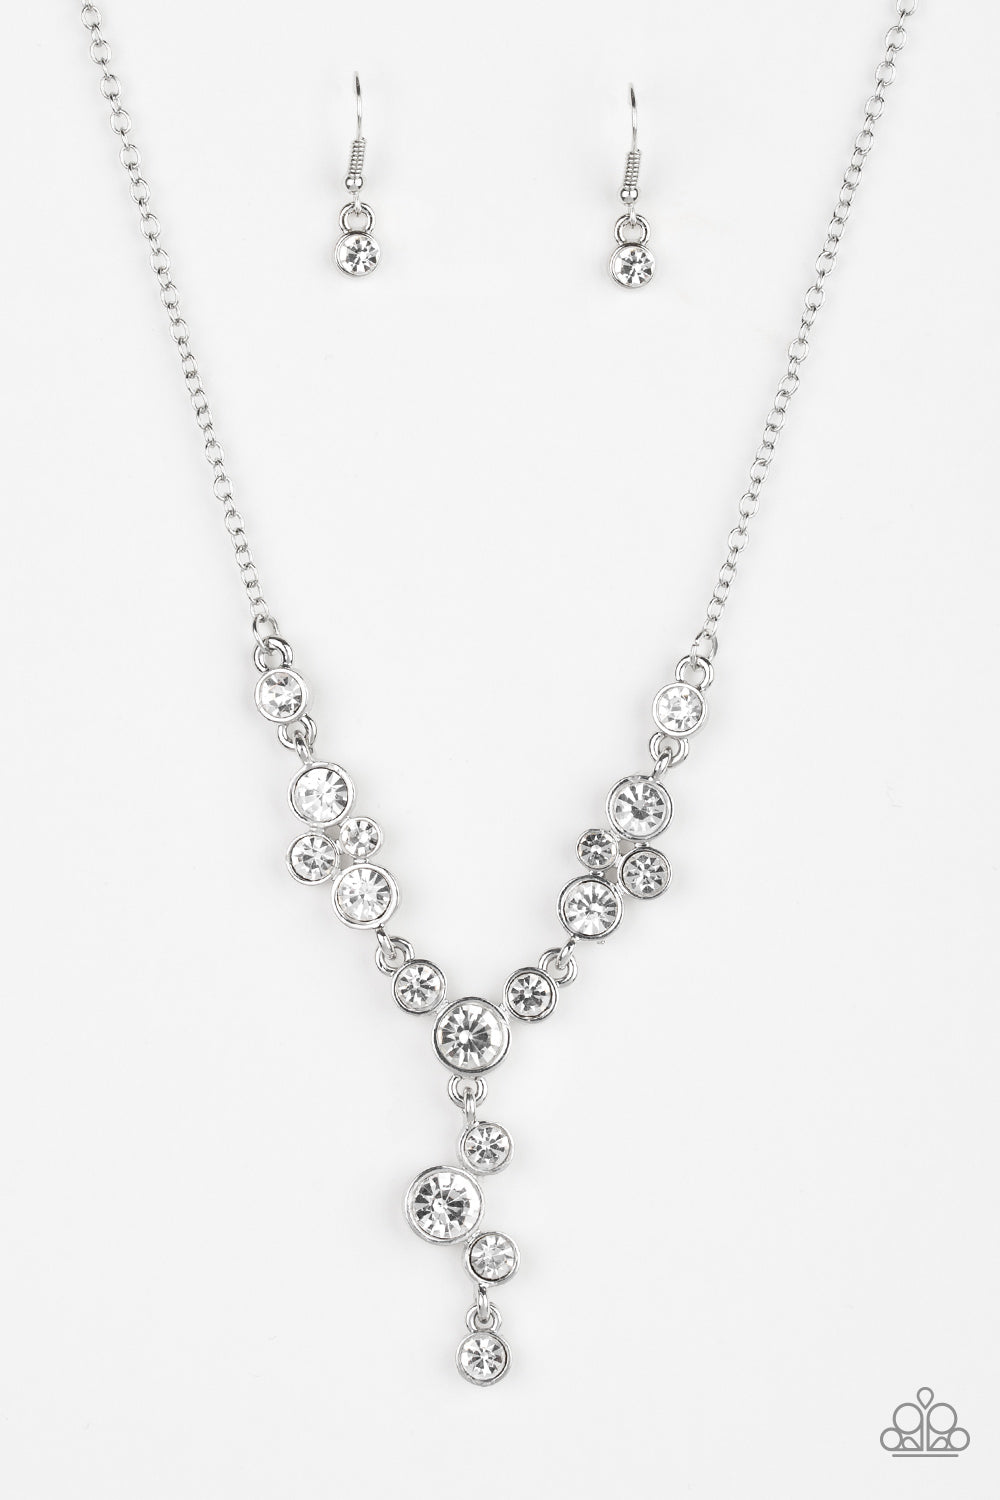 Five-Star Starlet - Paparazzi White Necklace - Be Adored Jewelry